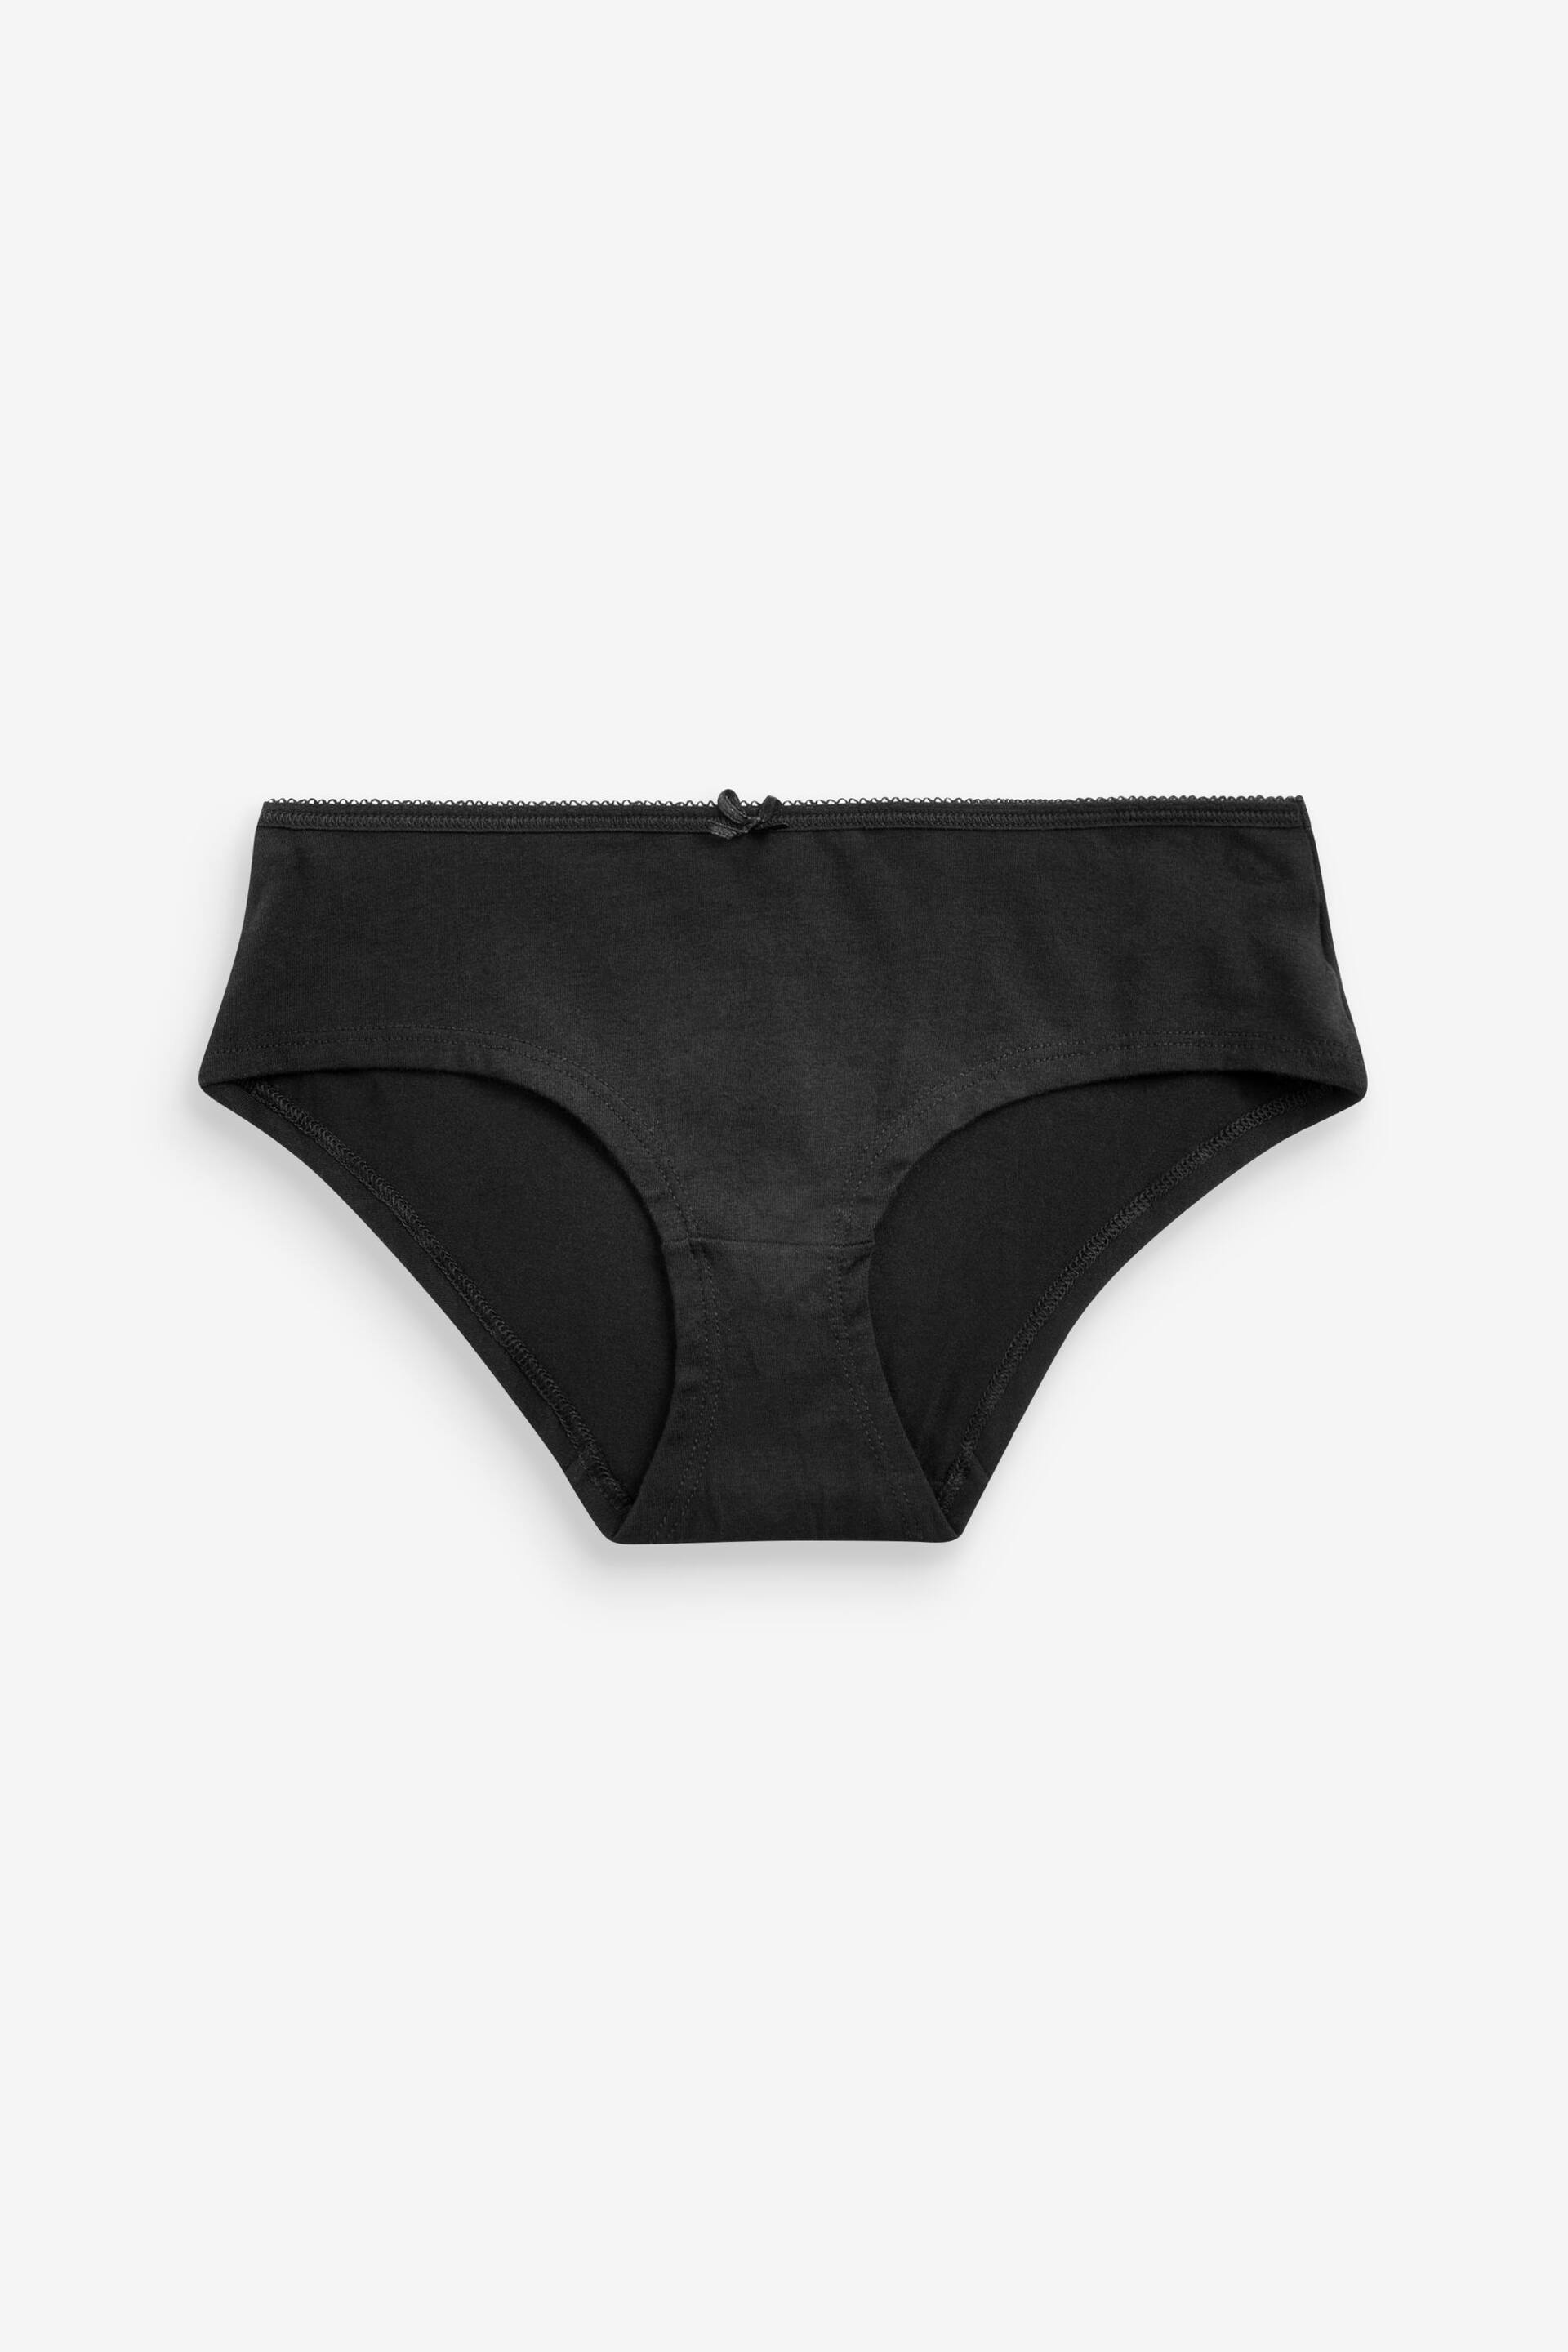 Black Short Cotton Rich Knickers 6 Pack - Image 3 of 4